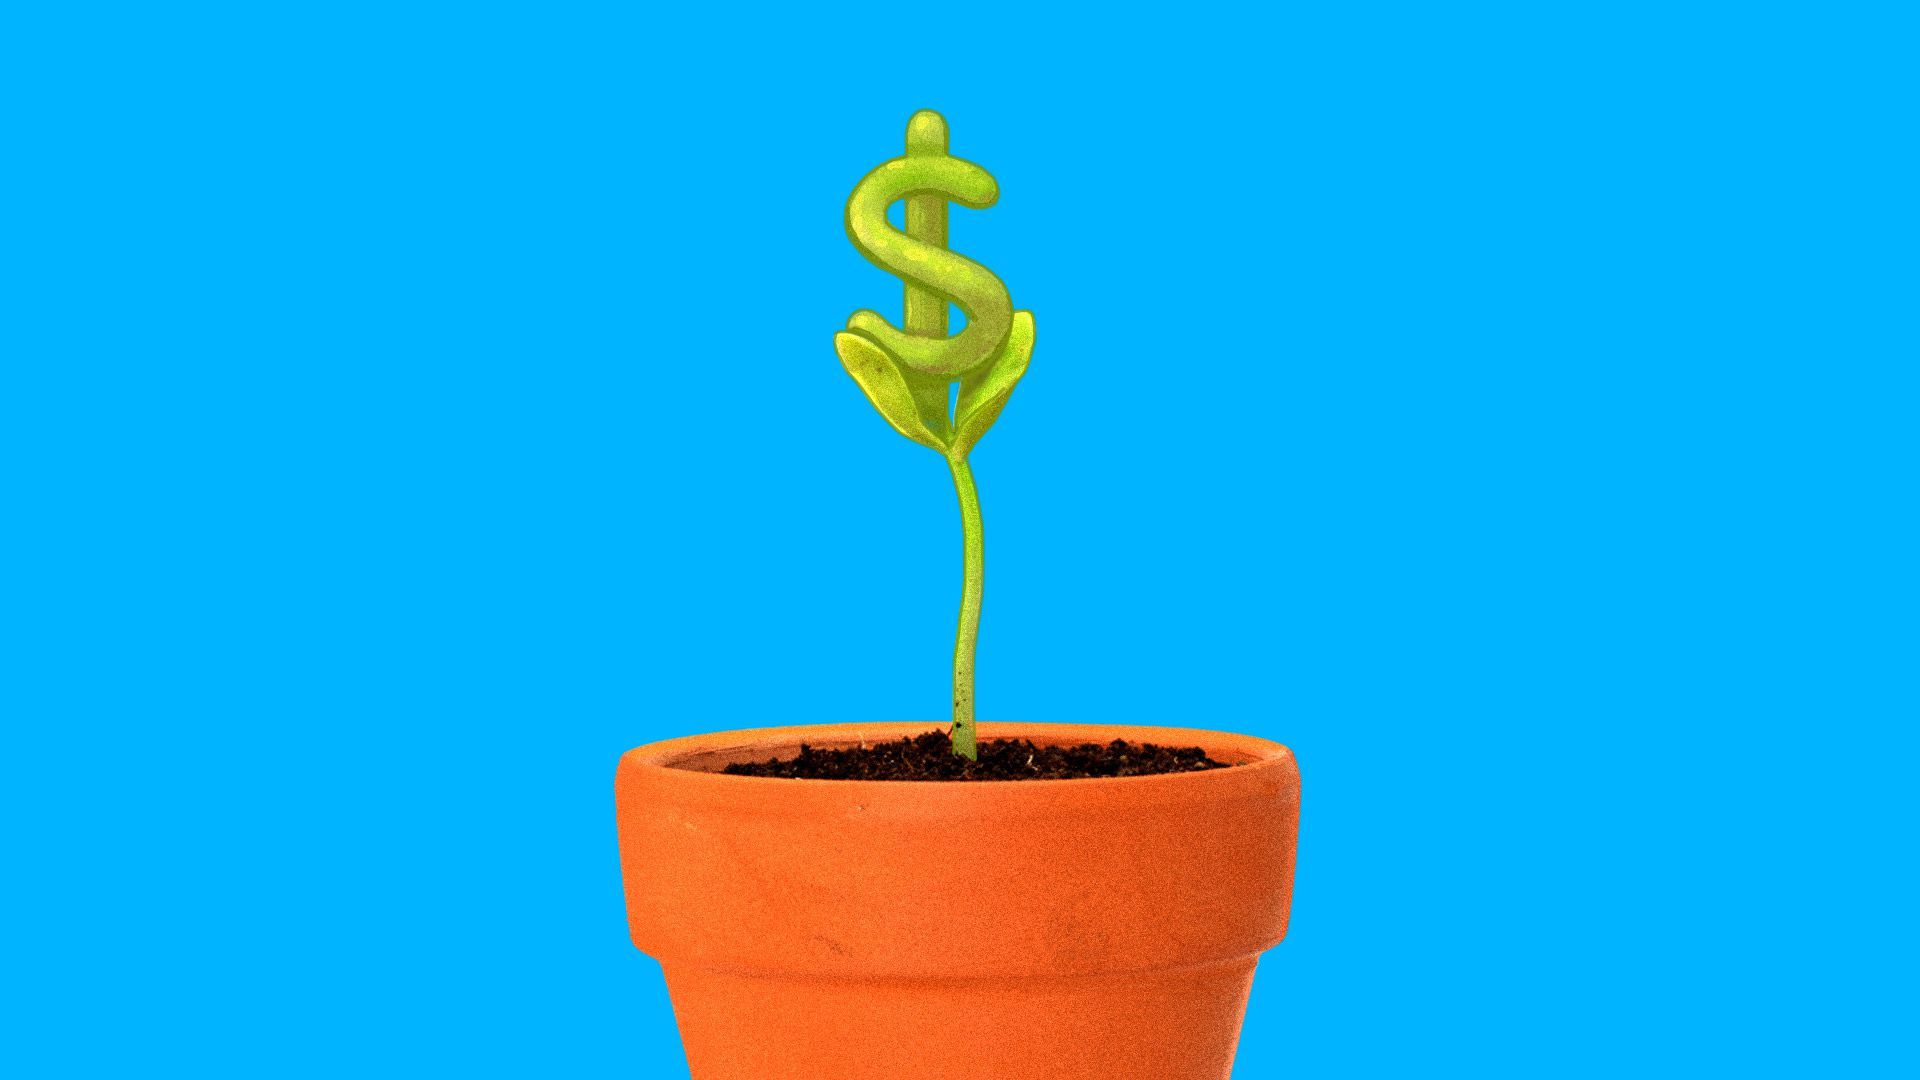 A green seedling shaped like a dollar sign sprouts from a terra cotta pot.